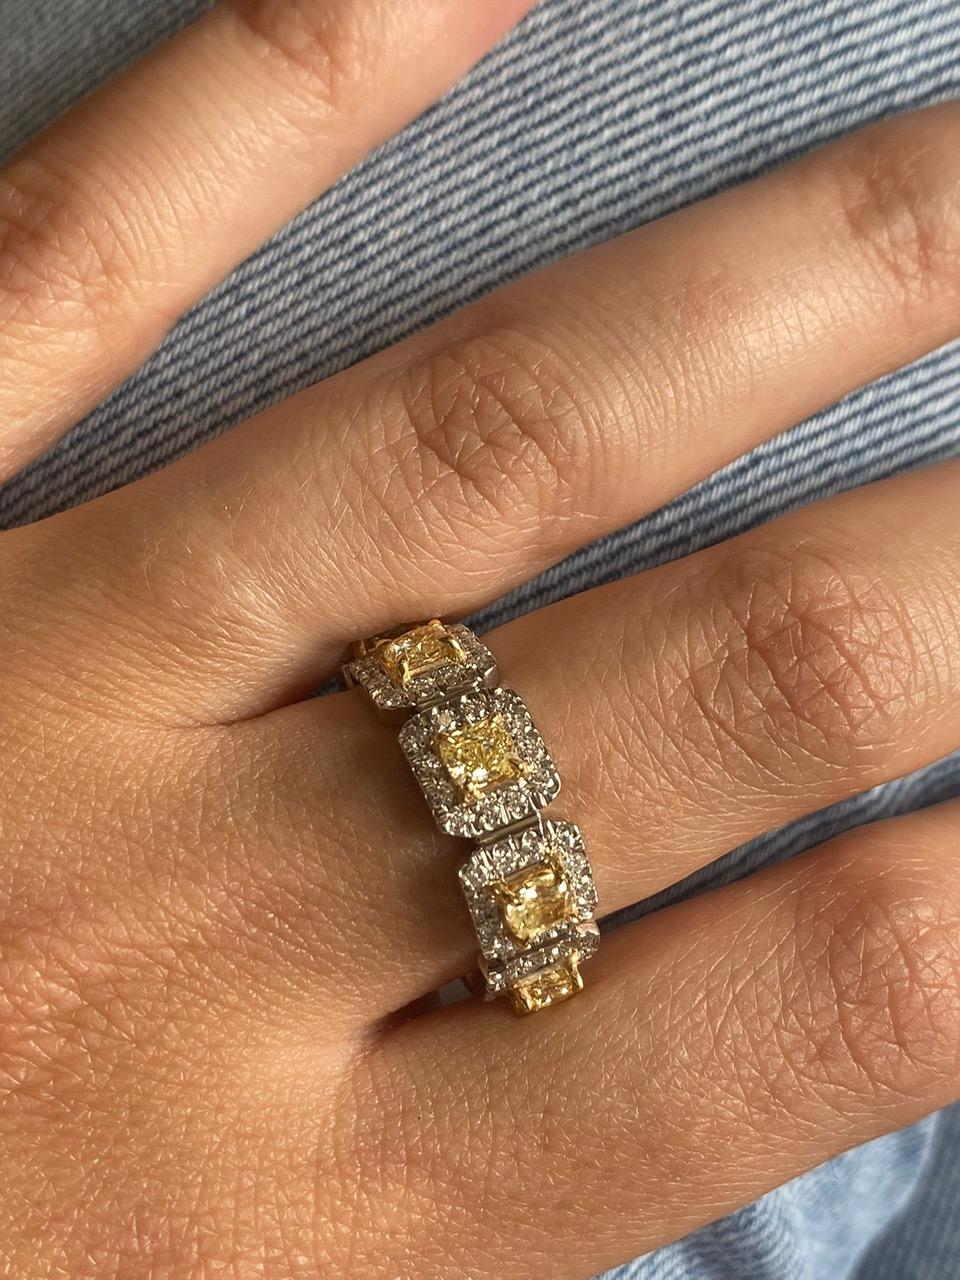 8 Yellow Diamonds weighing 1.96 Carats
96 Round White Diamonds weighing 1.44 Carats
Set in Platinum and 18 Karat Yellow Gold.
Size 6.75
Can be resized